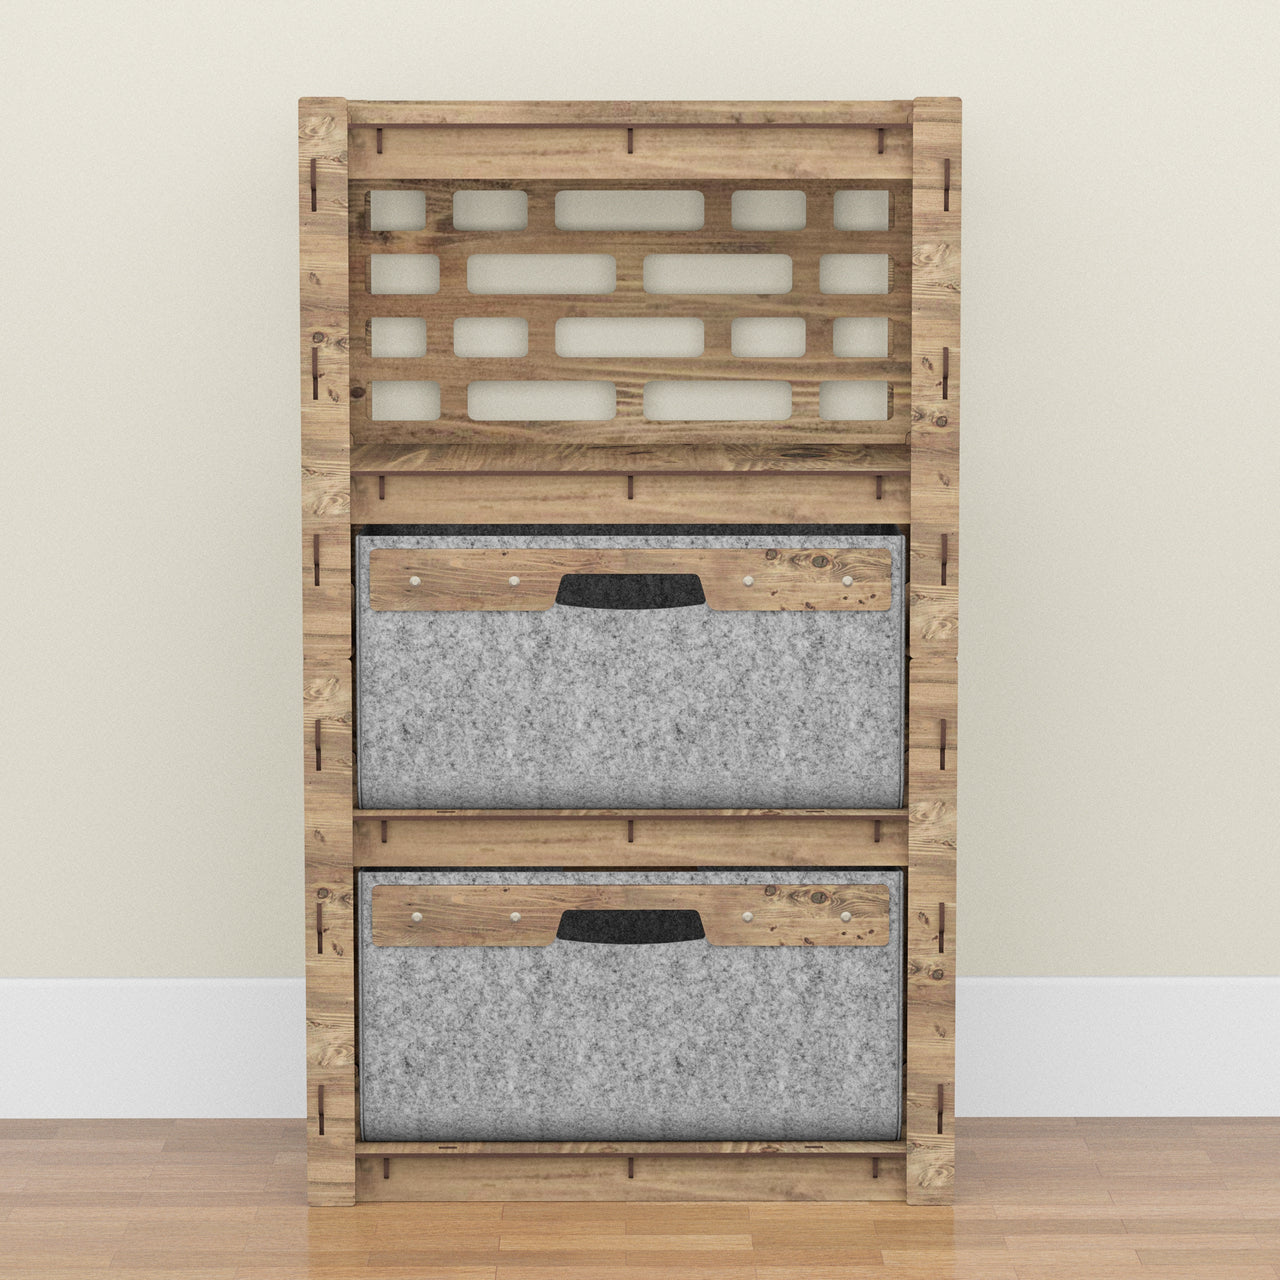 Brickwall Chest Of 2 Drawers Storage Cabinet [2 LARGE GRAY BINS]